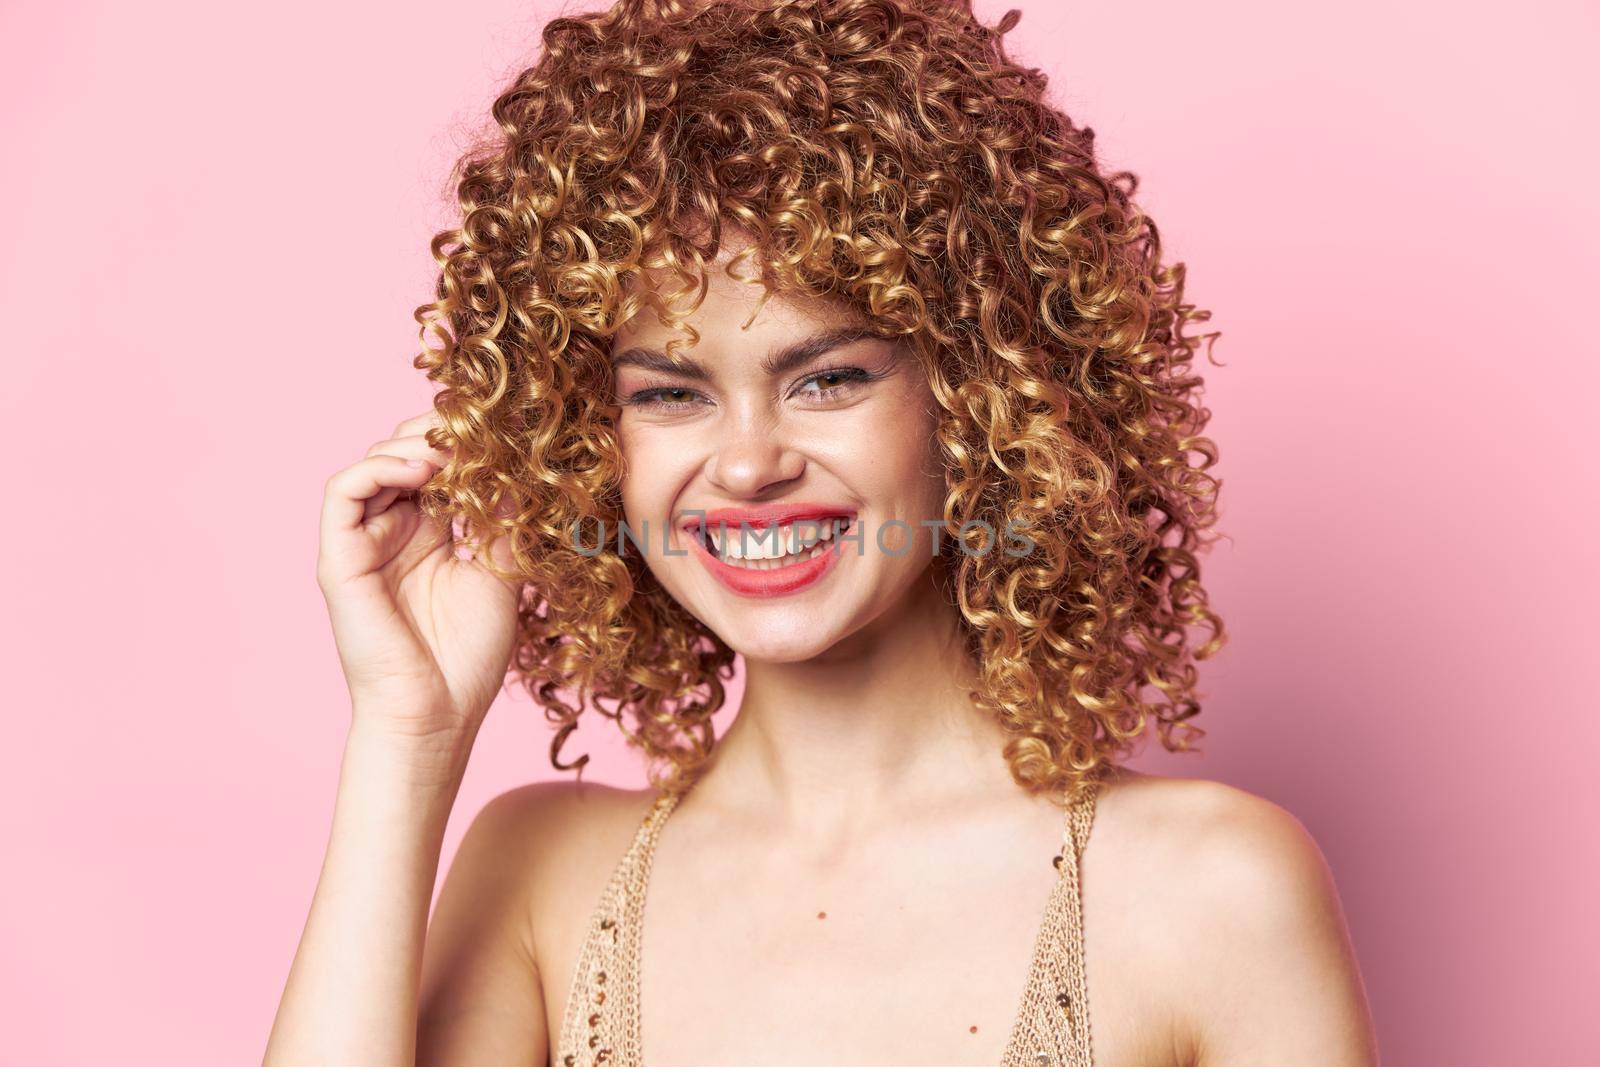 Model Curly hair smile red lips fun bright makeup by SHOTPRIME